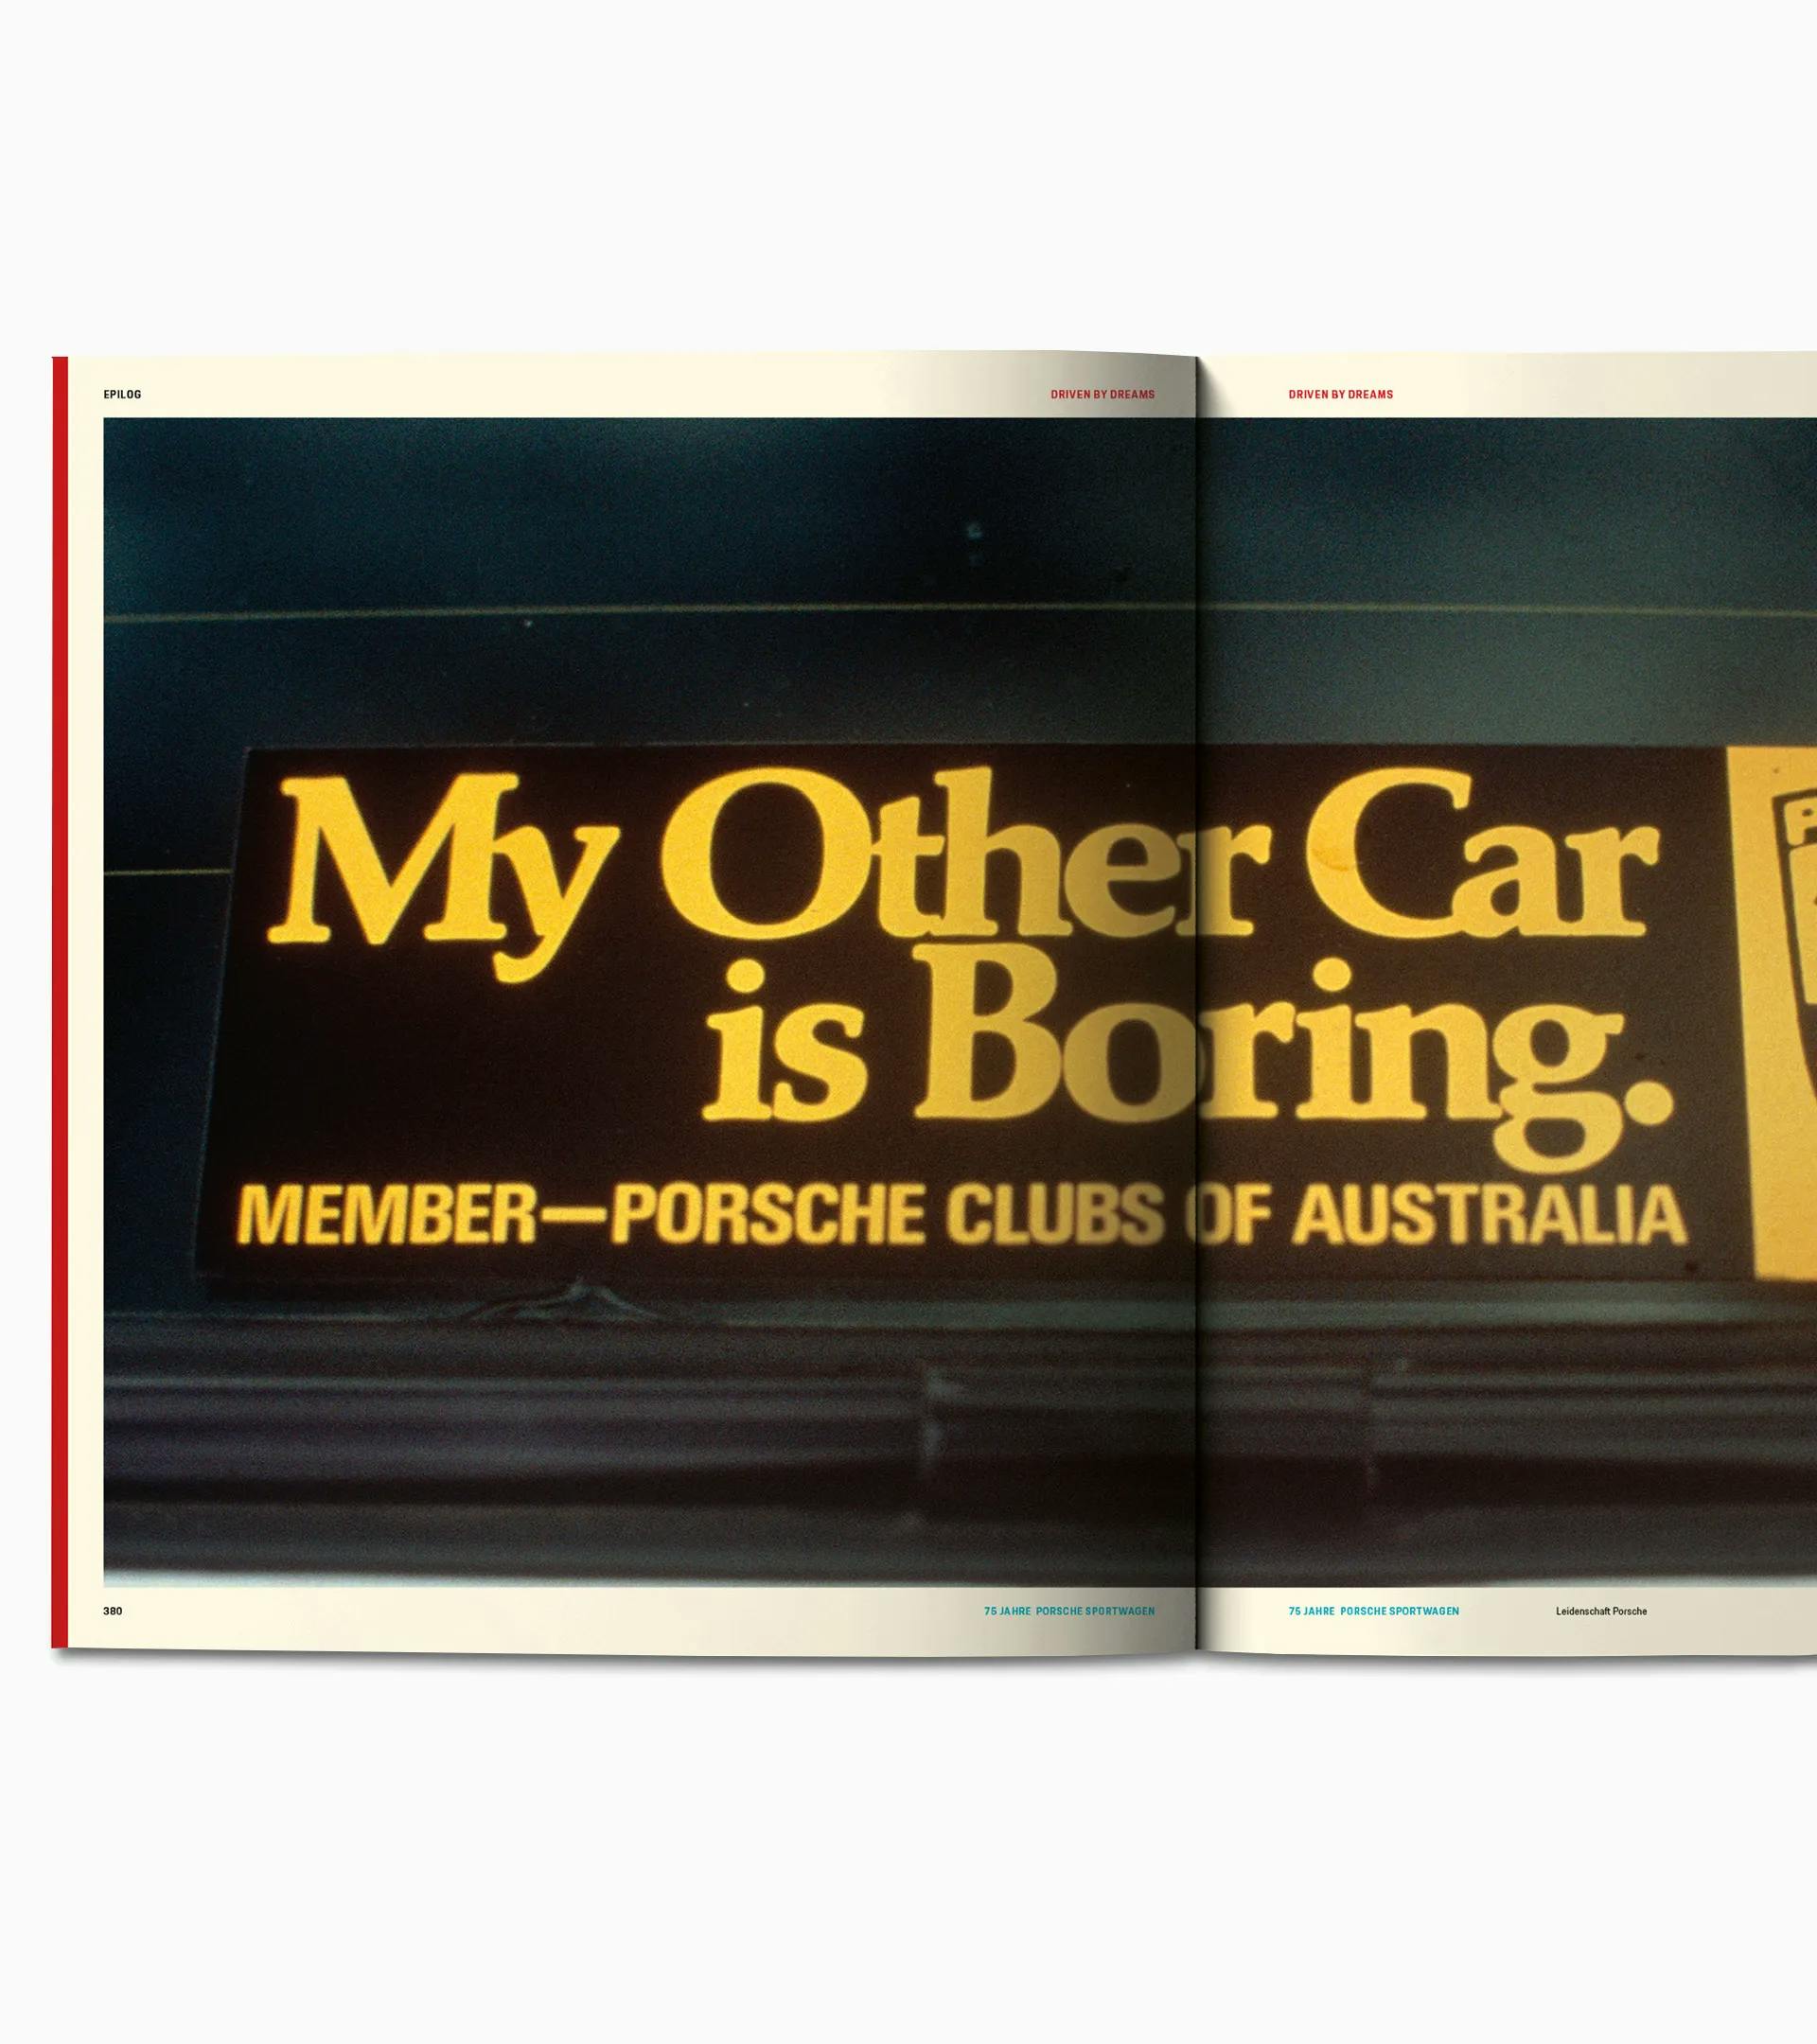 Book 'Driven by Dreams - 75 years of Porsche sports cars' book 6